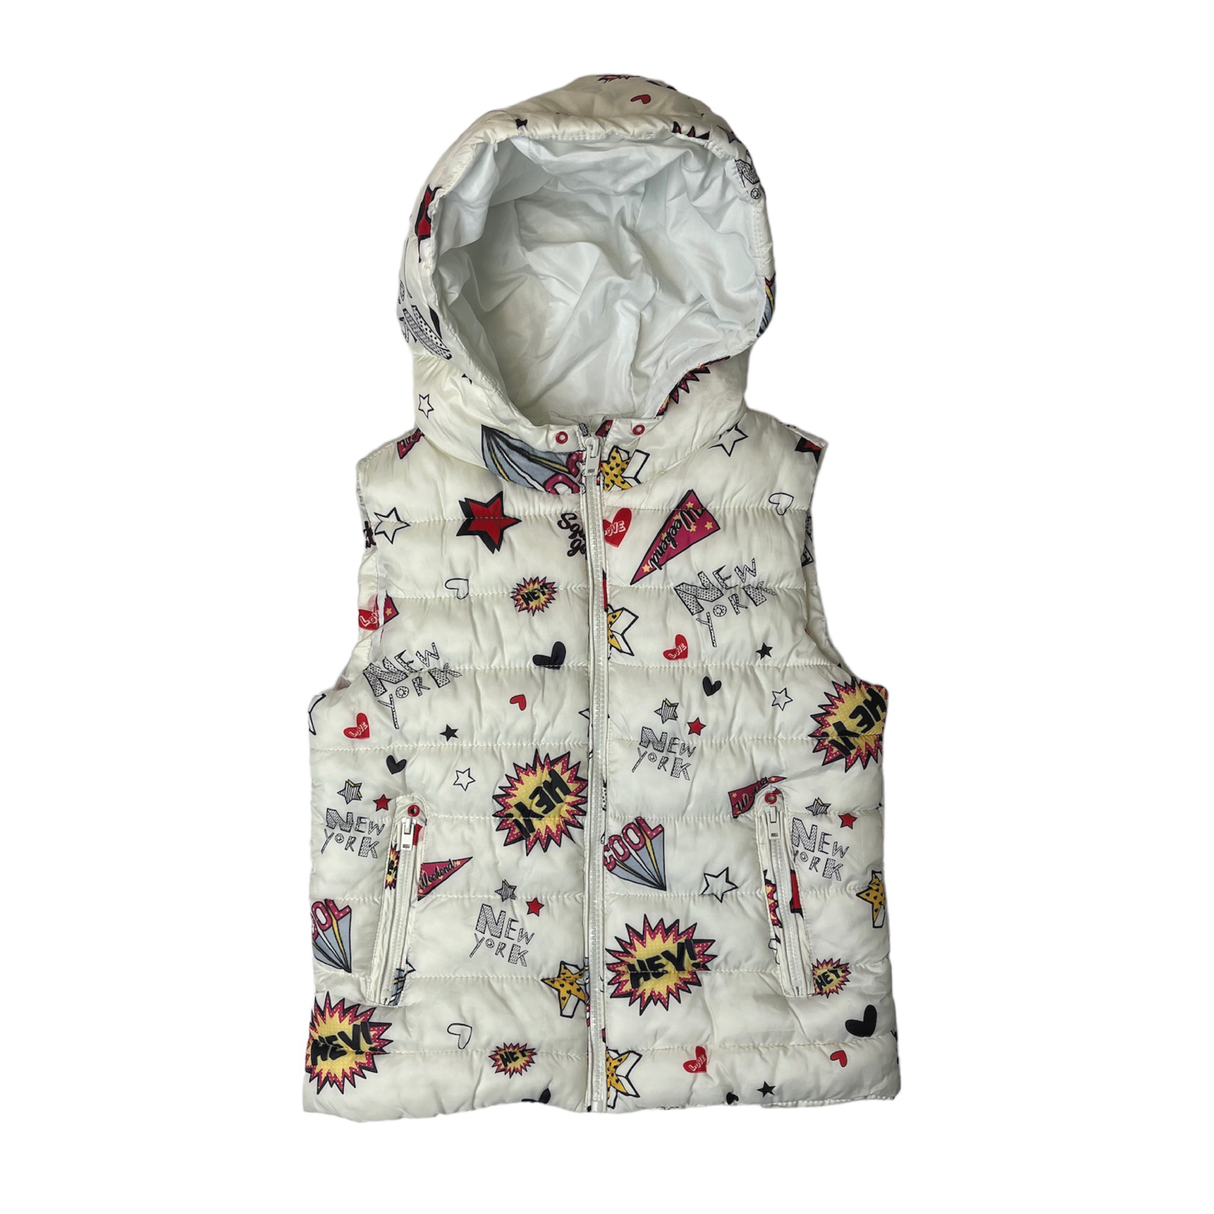 A second Chance - Zara Girsl 8-9 Vest Kids - Delivery all Over Lebanon